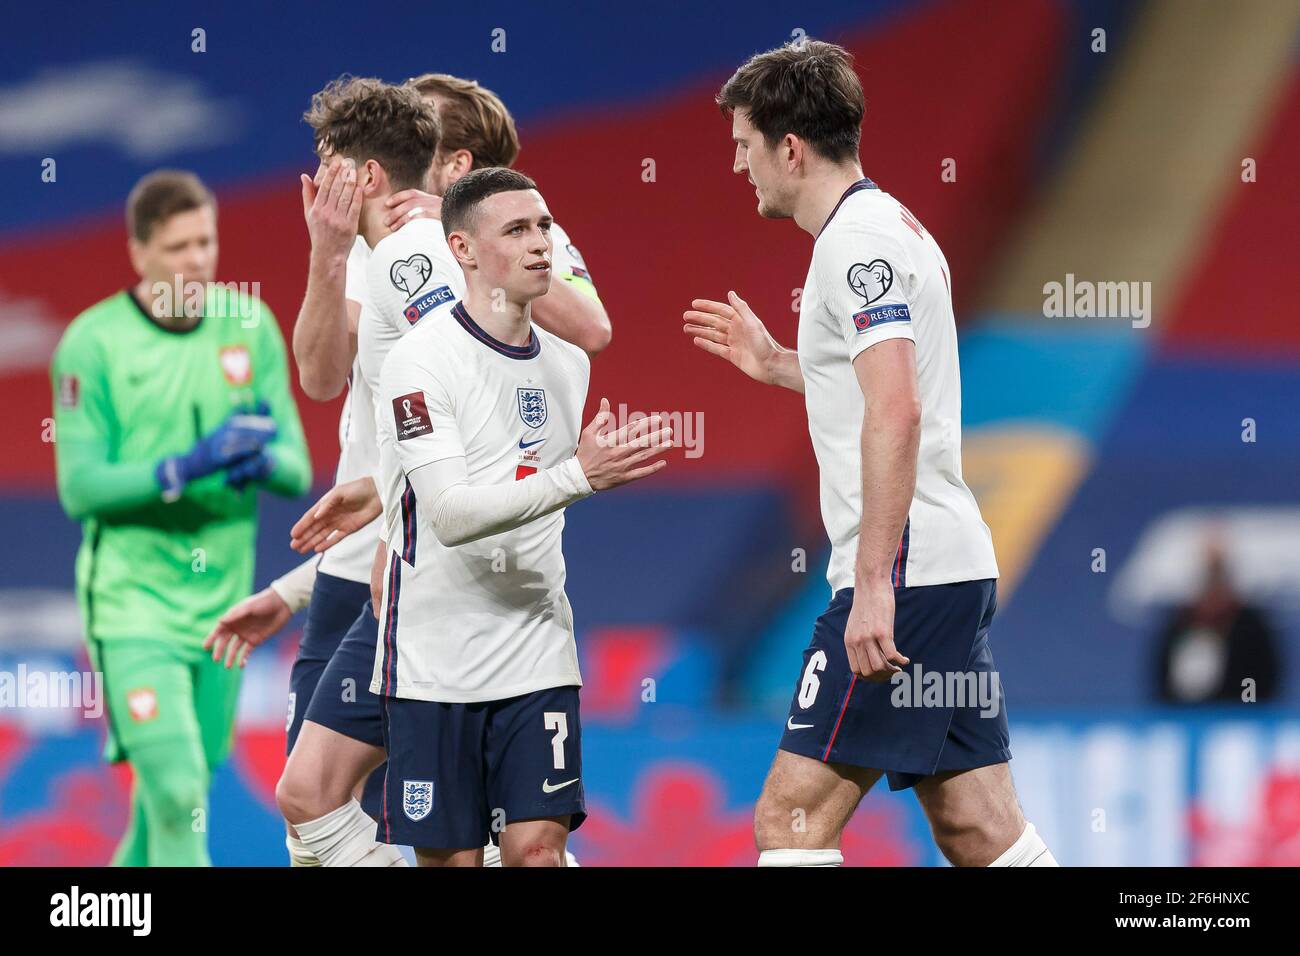 London, UK. 31st Mar, 2021. Harry Maguire of England celebrates with Phil Foden of England after scoring their second goal to make the score 2-1 during the FIFA World Cup 2022 Qualifying Group I match between England and Poland at Wembley Stadium on March 31st 2021 in London, England. (Photo by Daniel Chesterton/phcimages.com) Credit: PHC Images/Alamy Live News Stock Photo